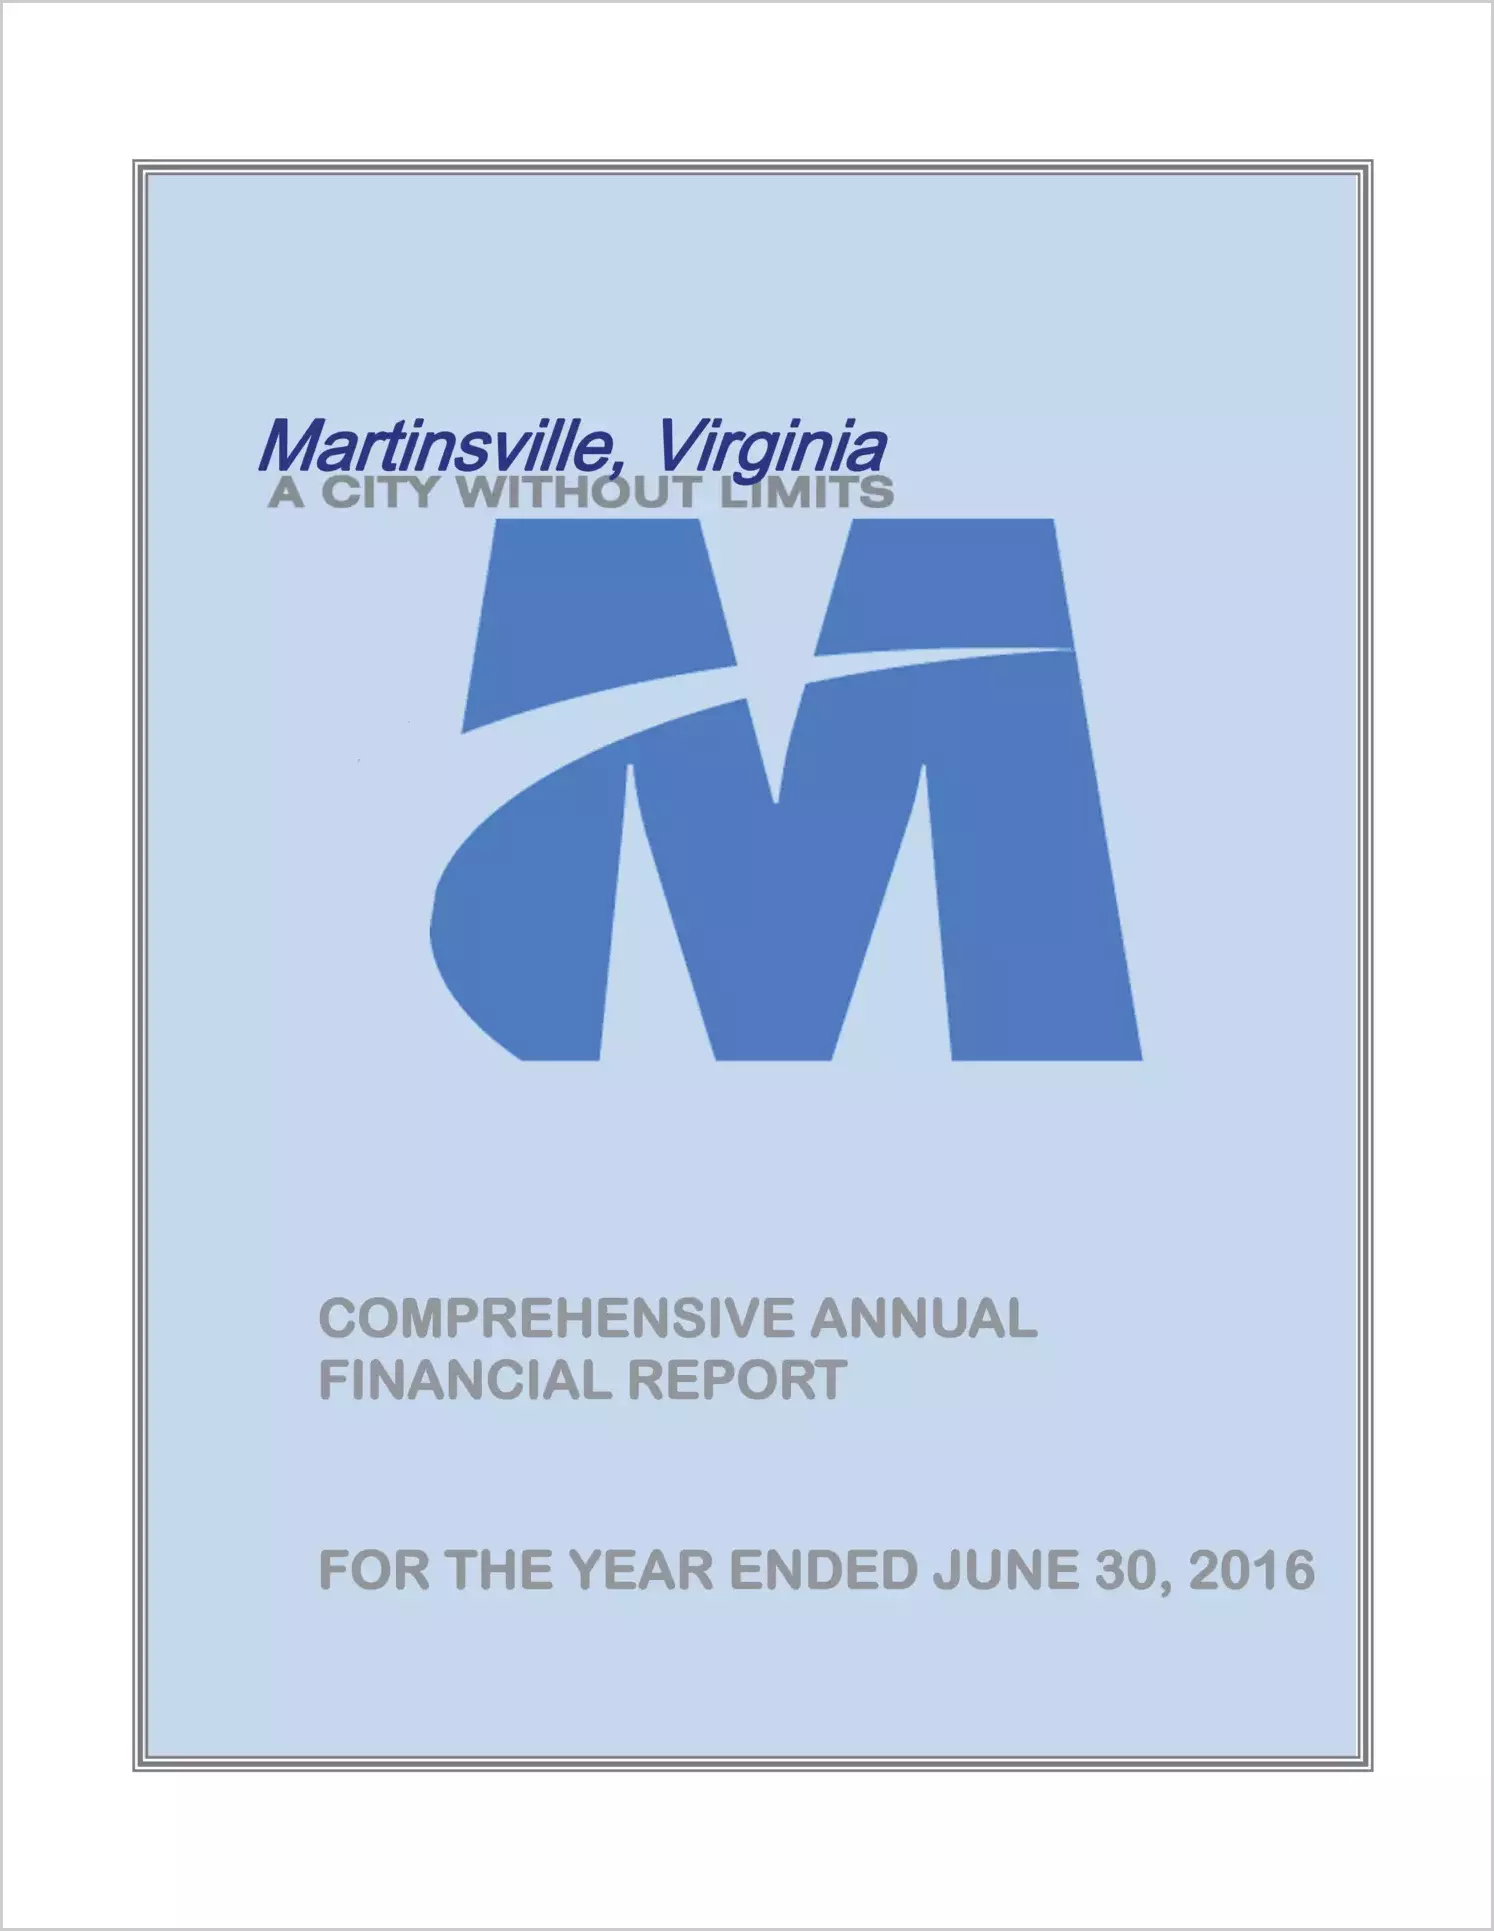 2016 Annual Financial Report for City of Martinsville